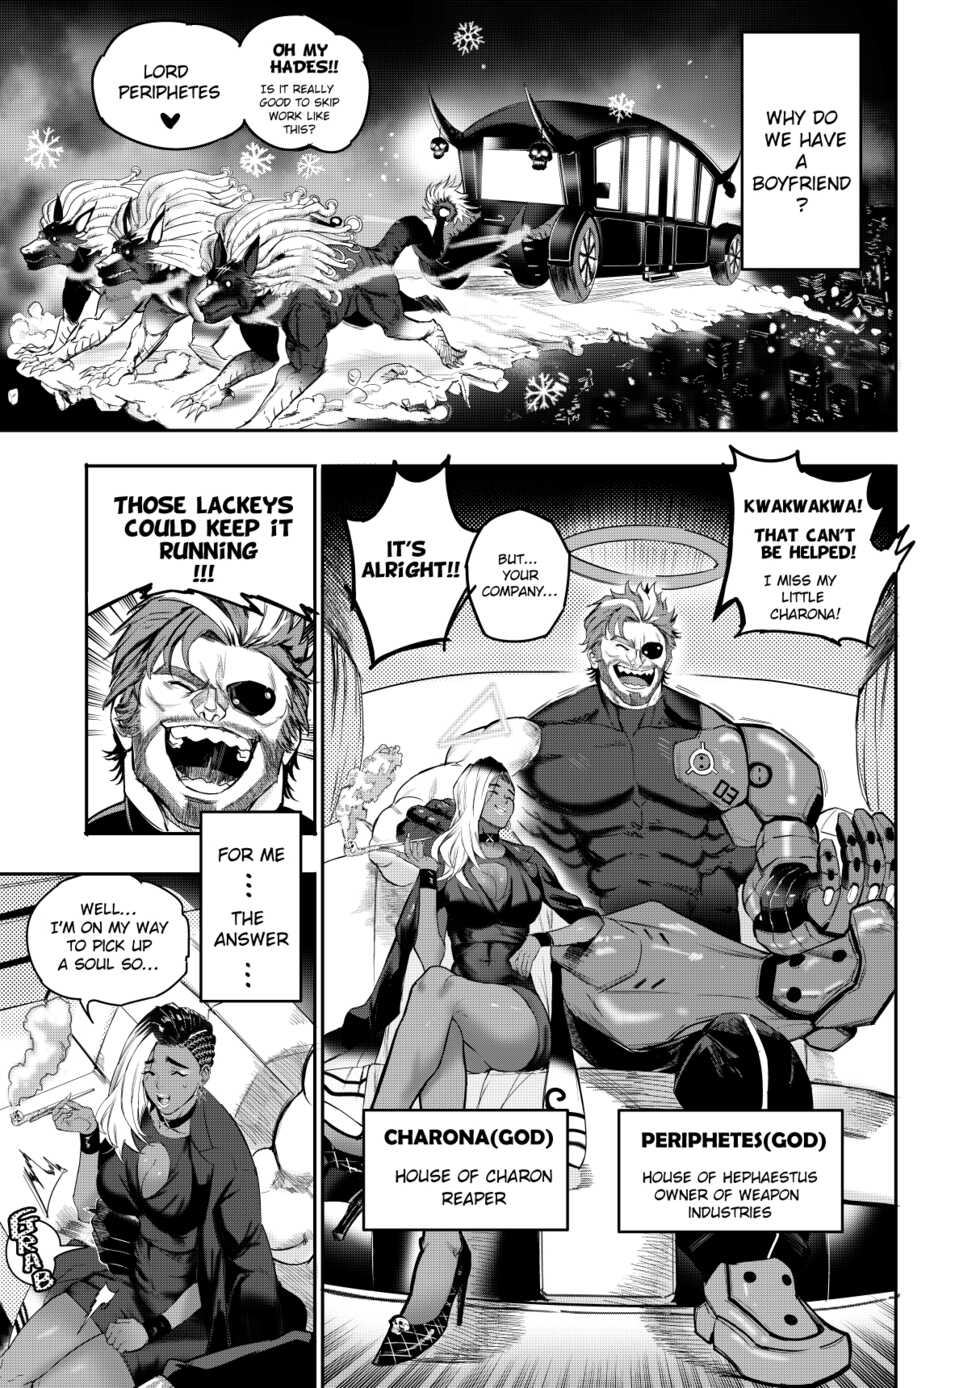 (Furiouzly) I sold my body to a god - Charona side story [English] - Page 2